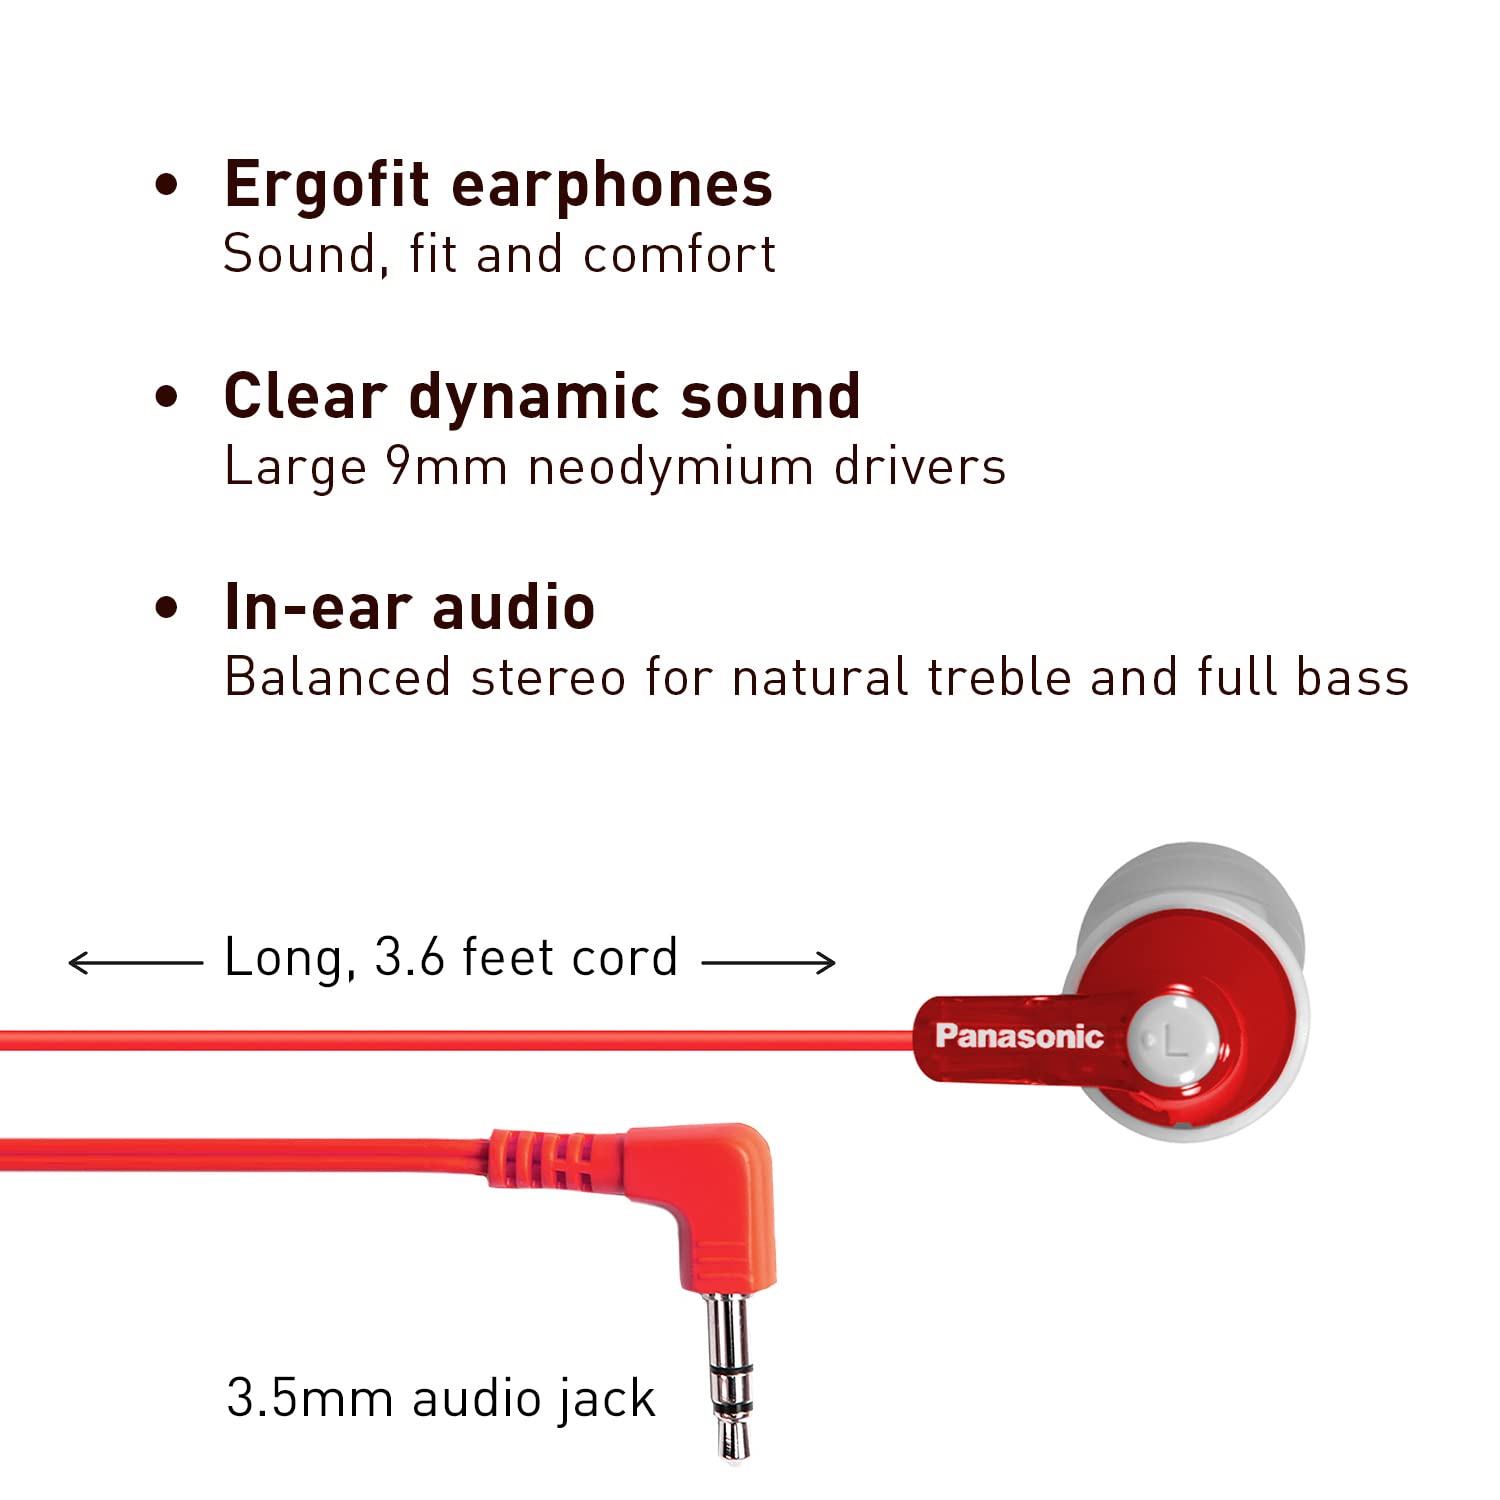 Panasonic ErgoFit Wired Earbuds, In-Ear Headphones with Dynamic Crystal-Clear Sound and Ergonomic Custom-Fit Earpieces (S/M/L), 3.5mm Jack for Phones and Laptops, No Mic - RP-HJE120-R (Red)